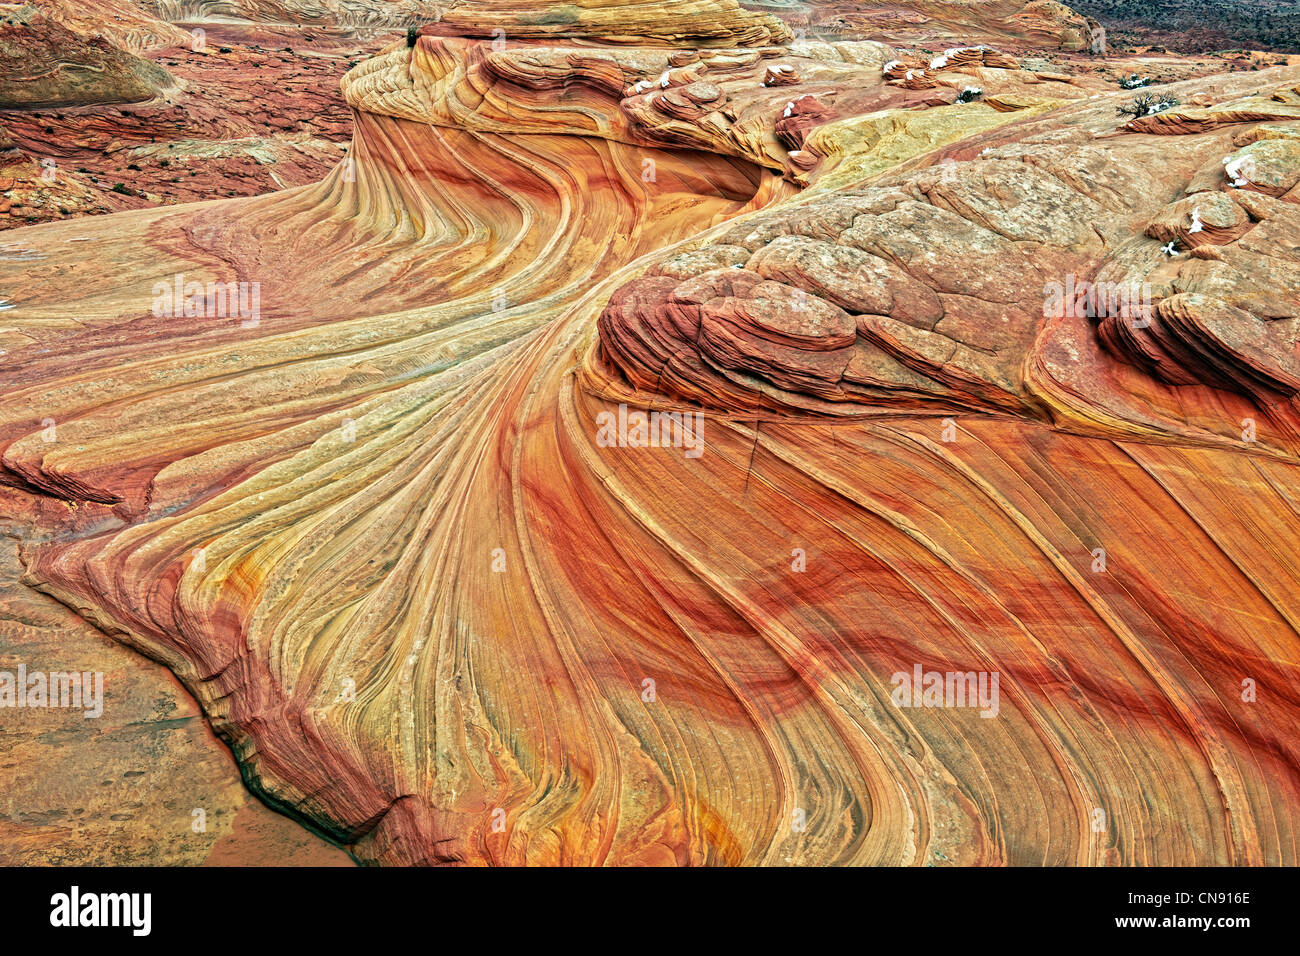 Overcast winter conditions enhance the colors of the Second Wave in Arizona’s North Coyote Buttes and Vermillion Cliffs. Stock Photo